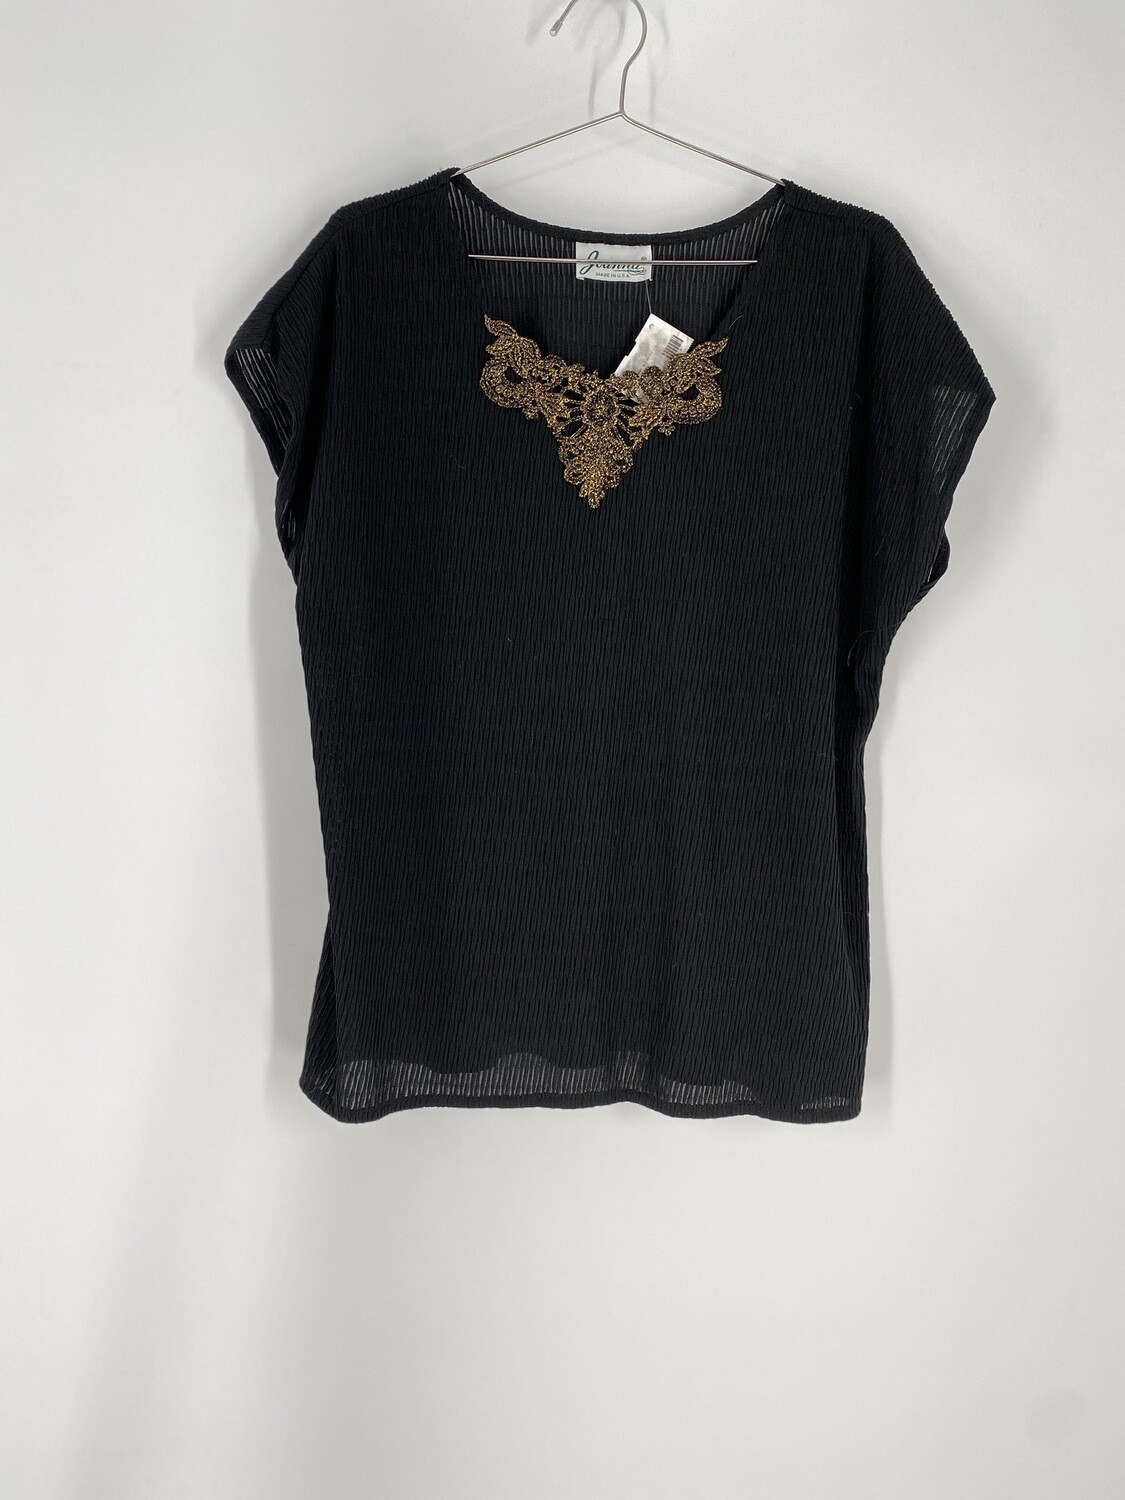 Joanna Black And Gold Appliqué short Sleeve Top Size L